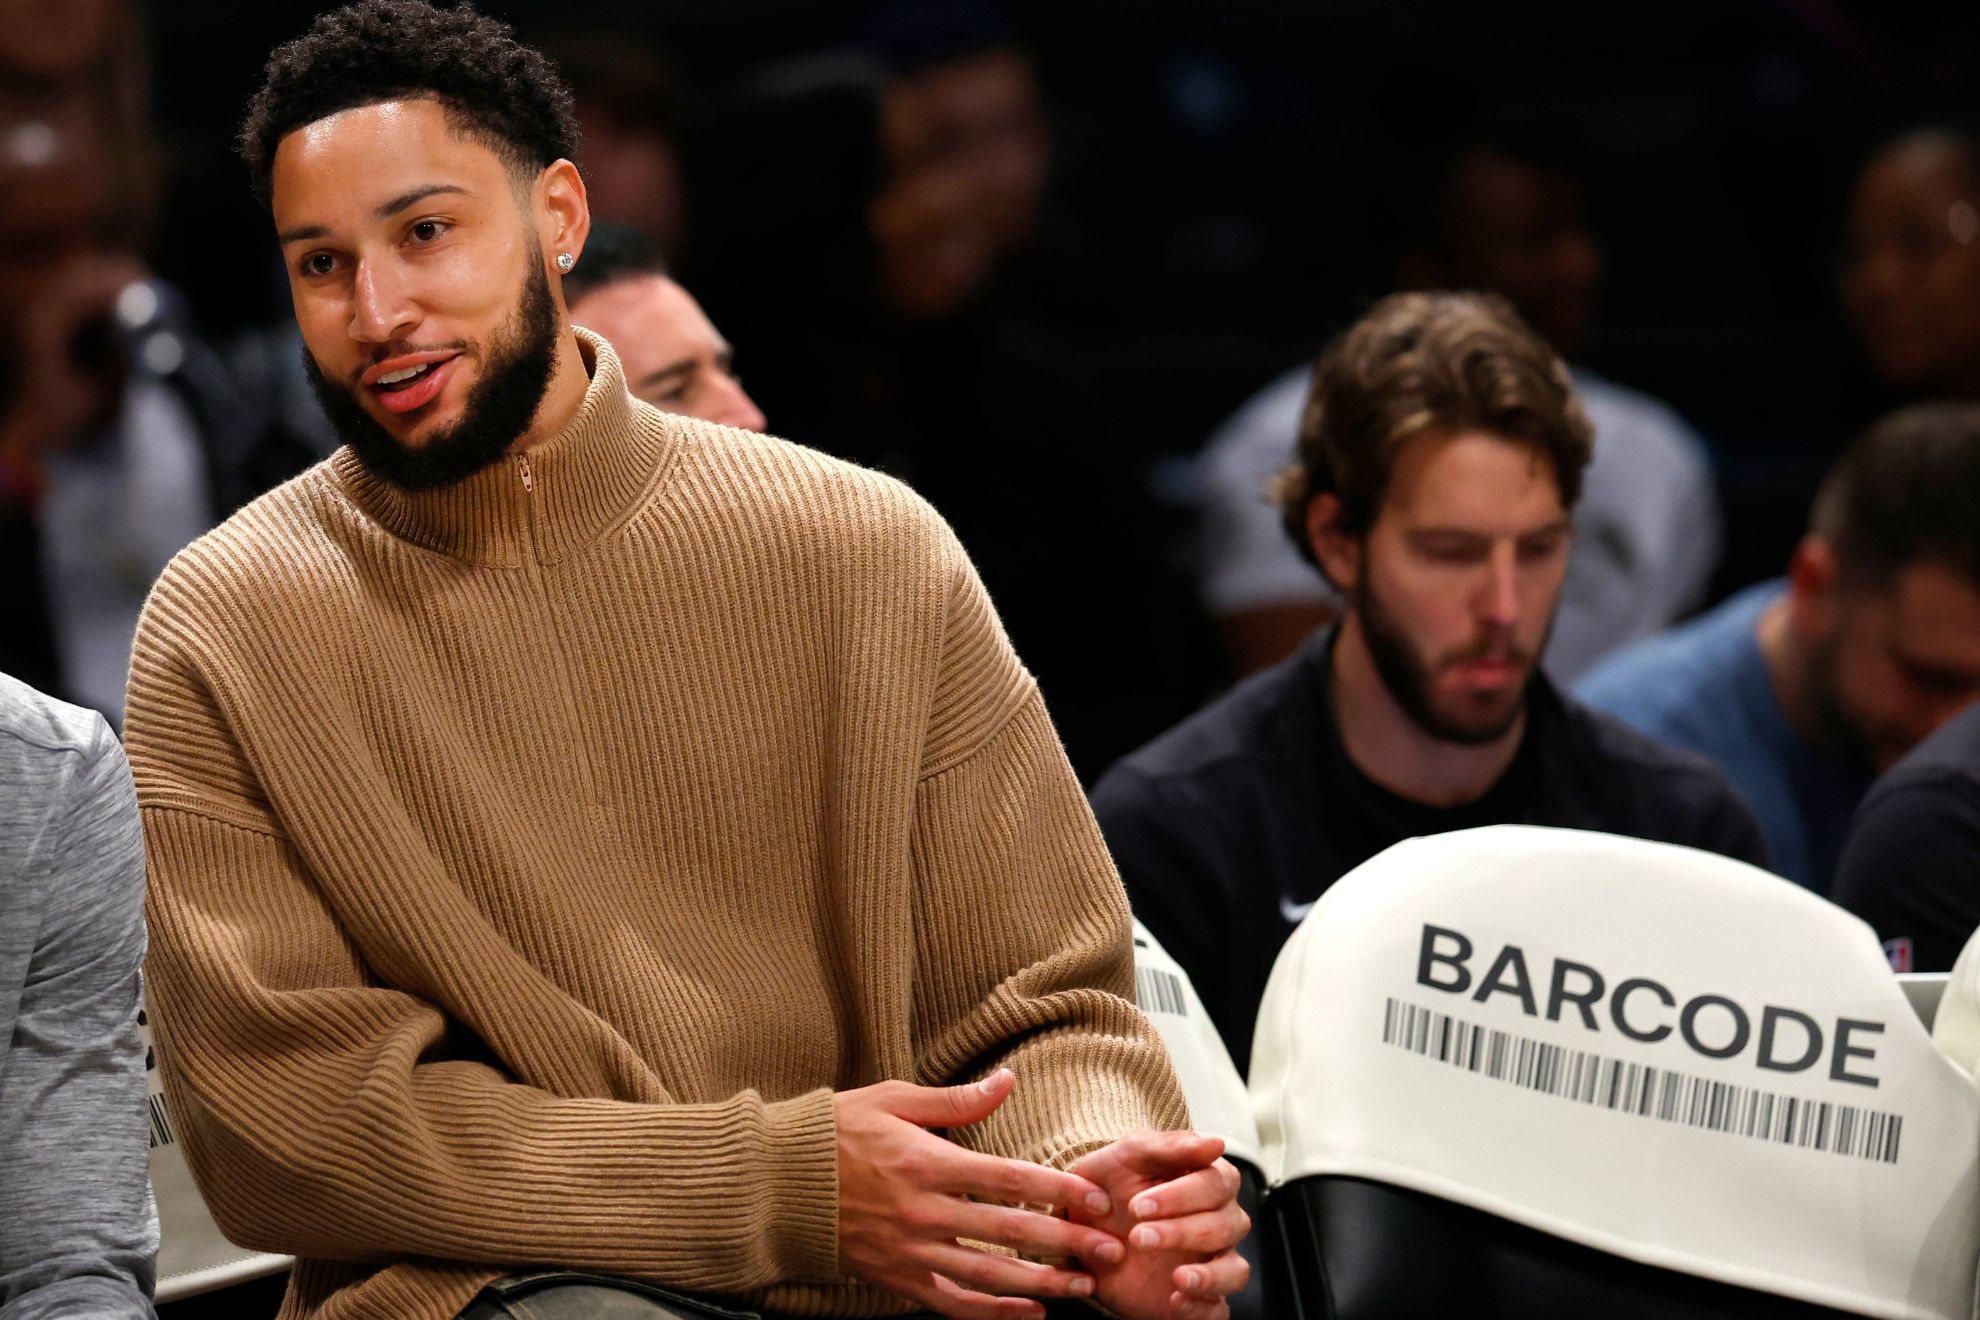 Ben Simmons shut down for the season by the Nets; undergoes surgery